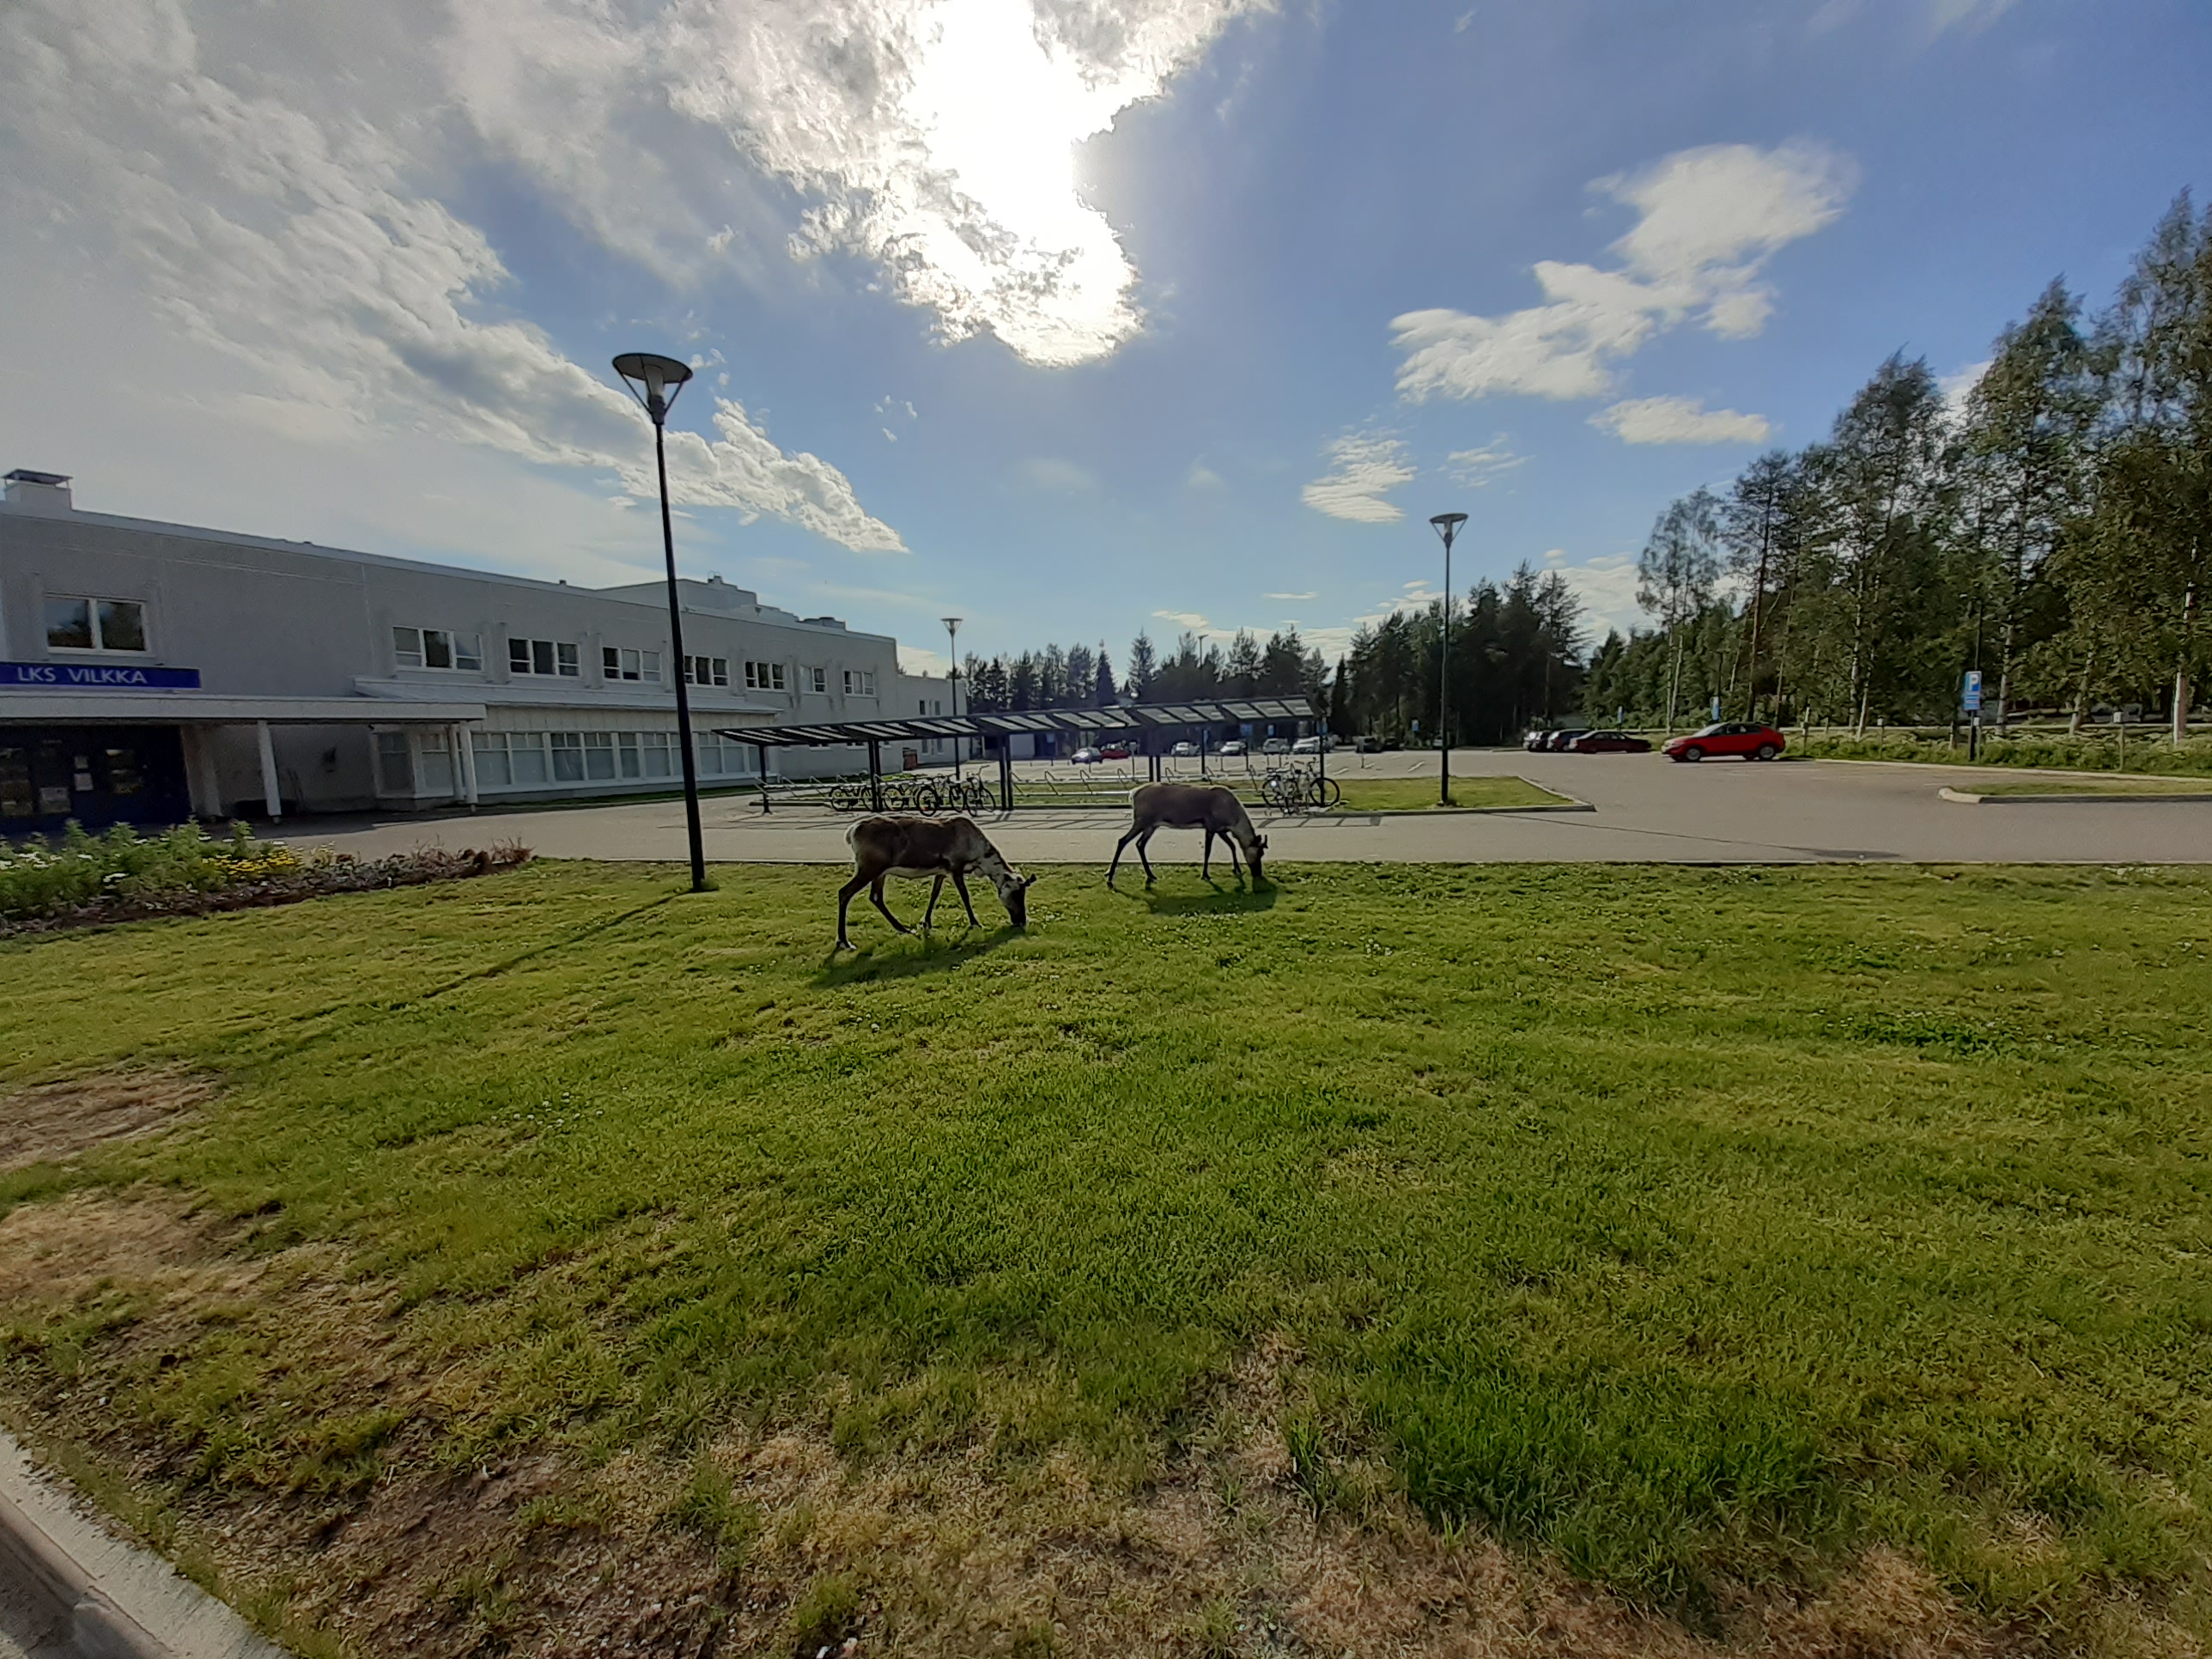 File:Reindeer at hospital  - Wikimedia Commons